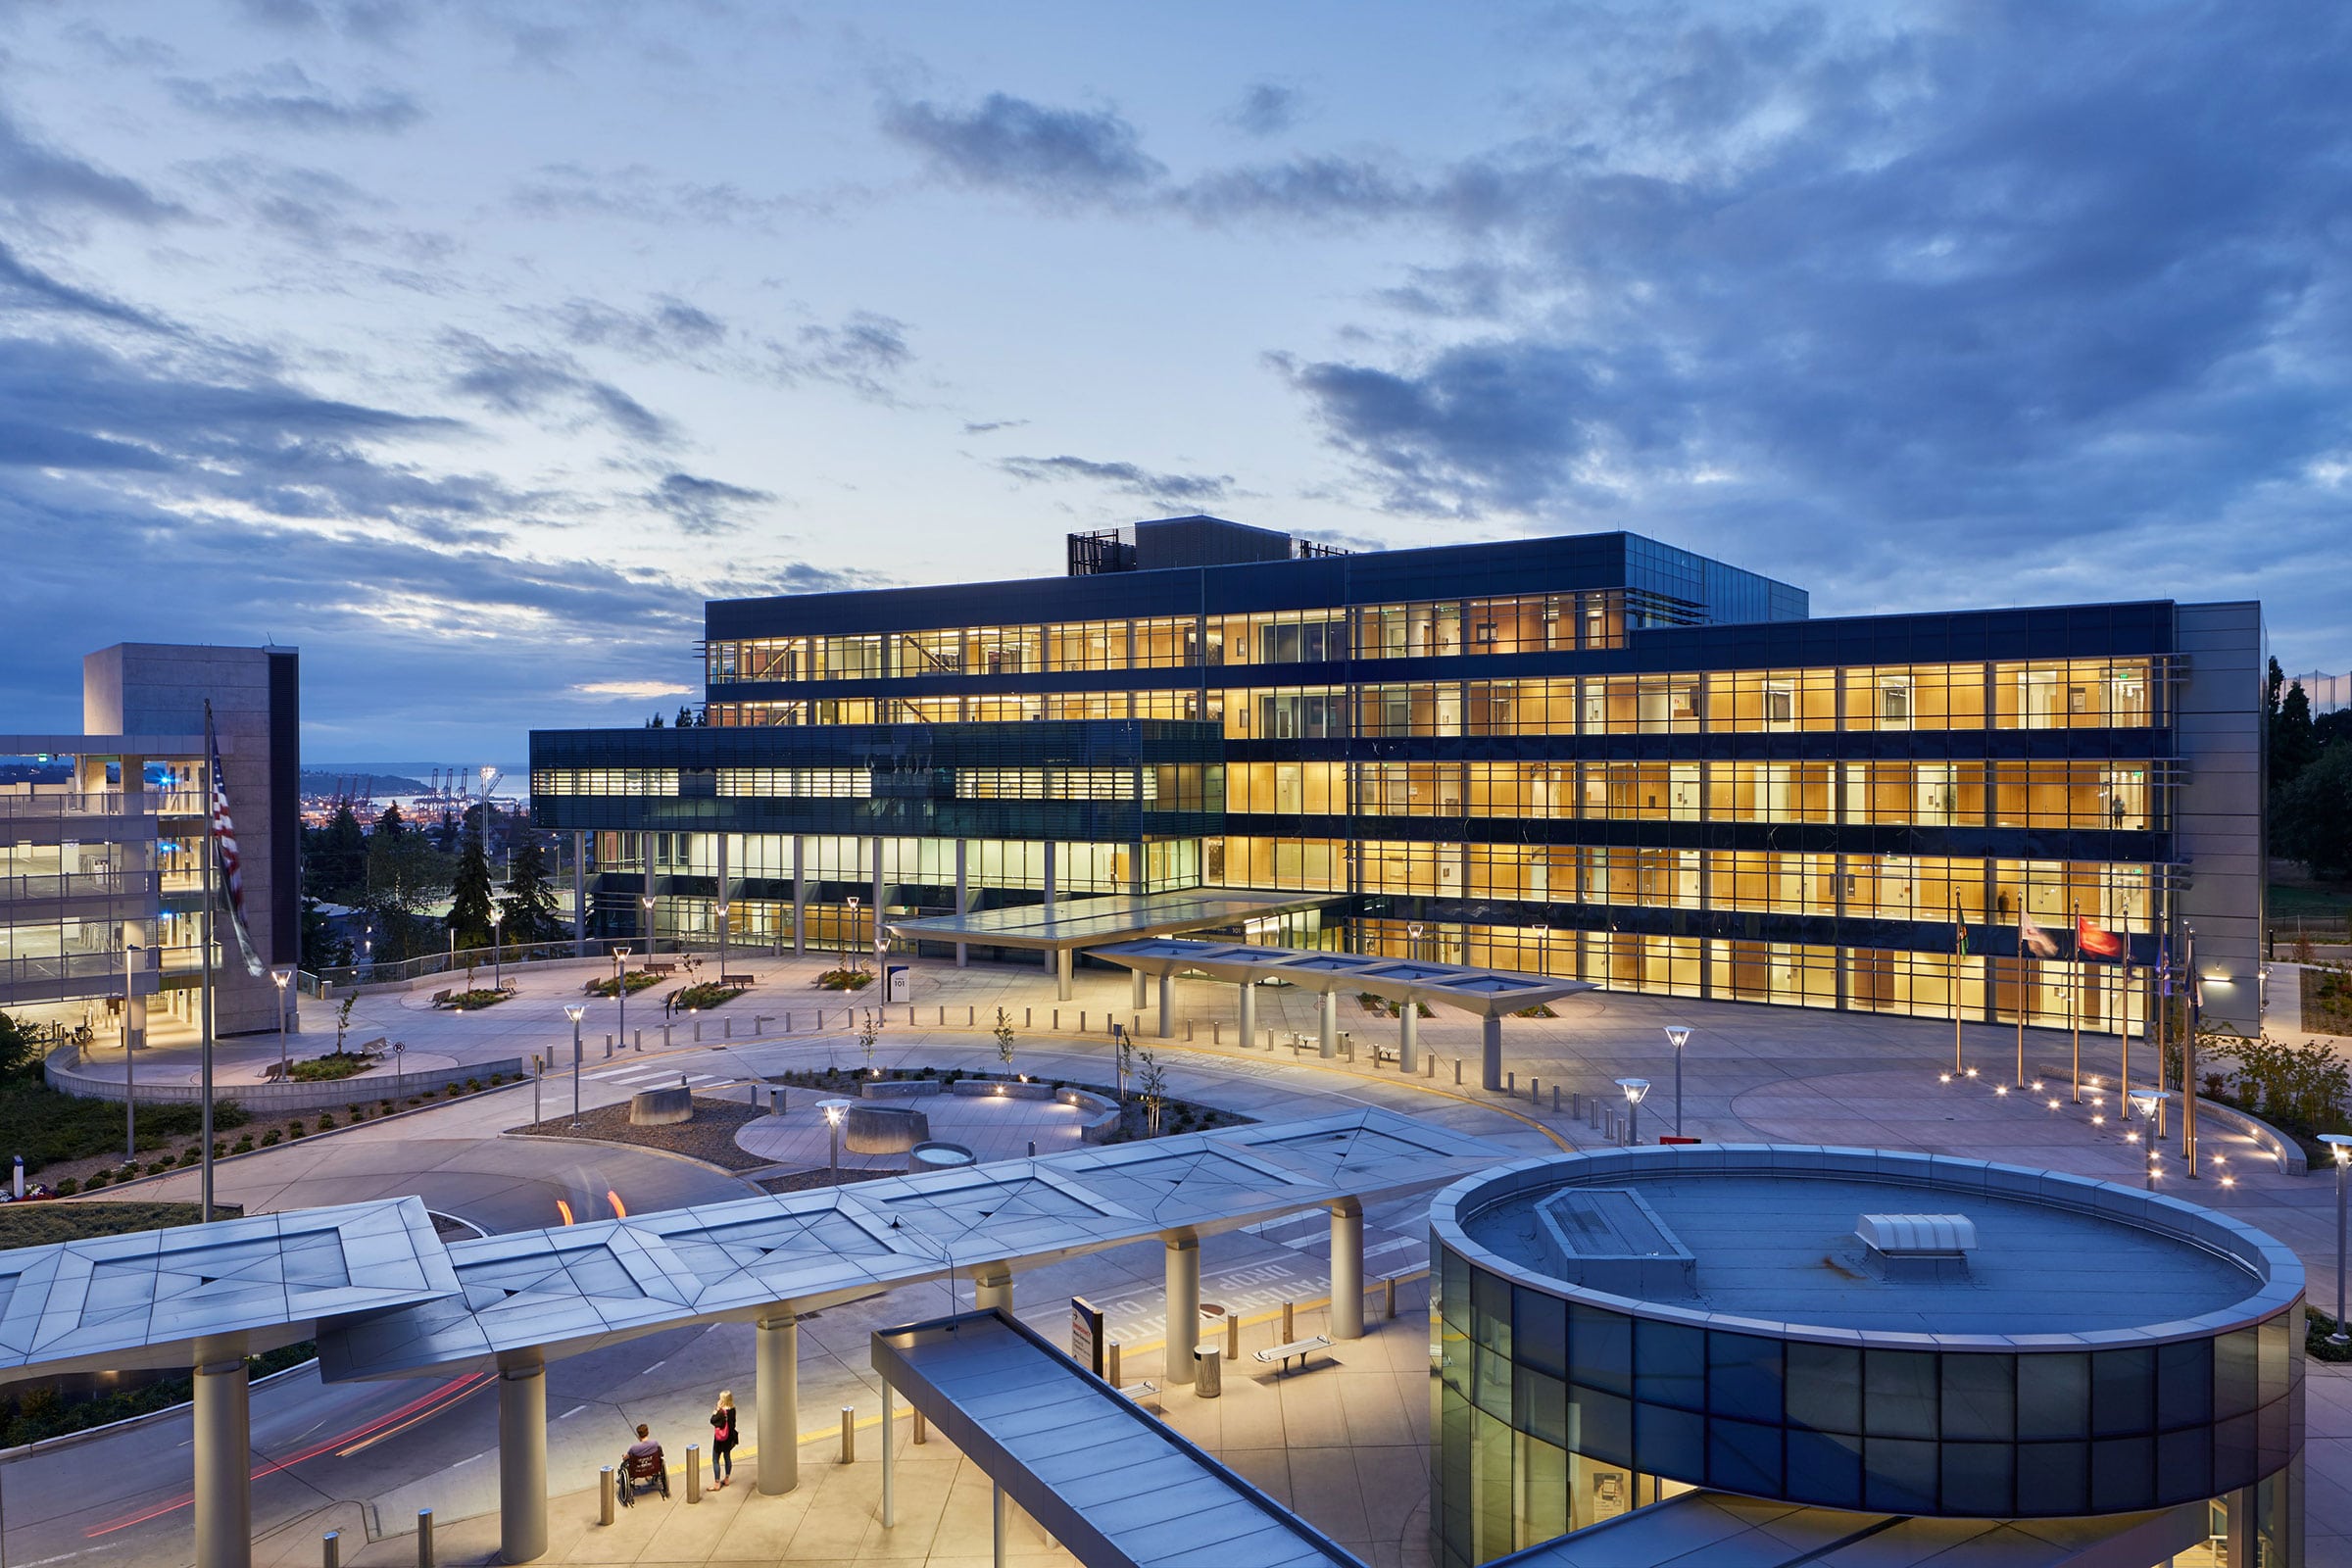 How This Veterans Research Building from Stantec Evolved Amidst Design Changes